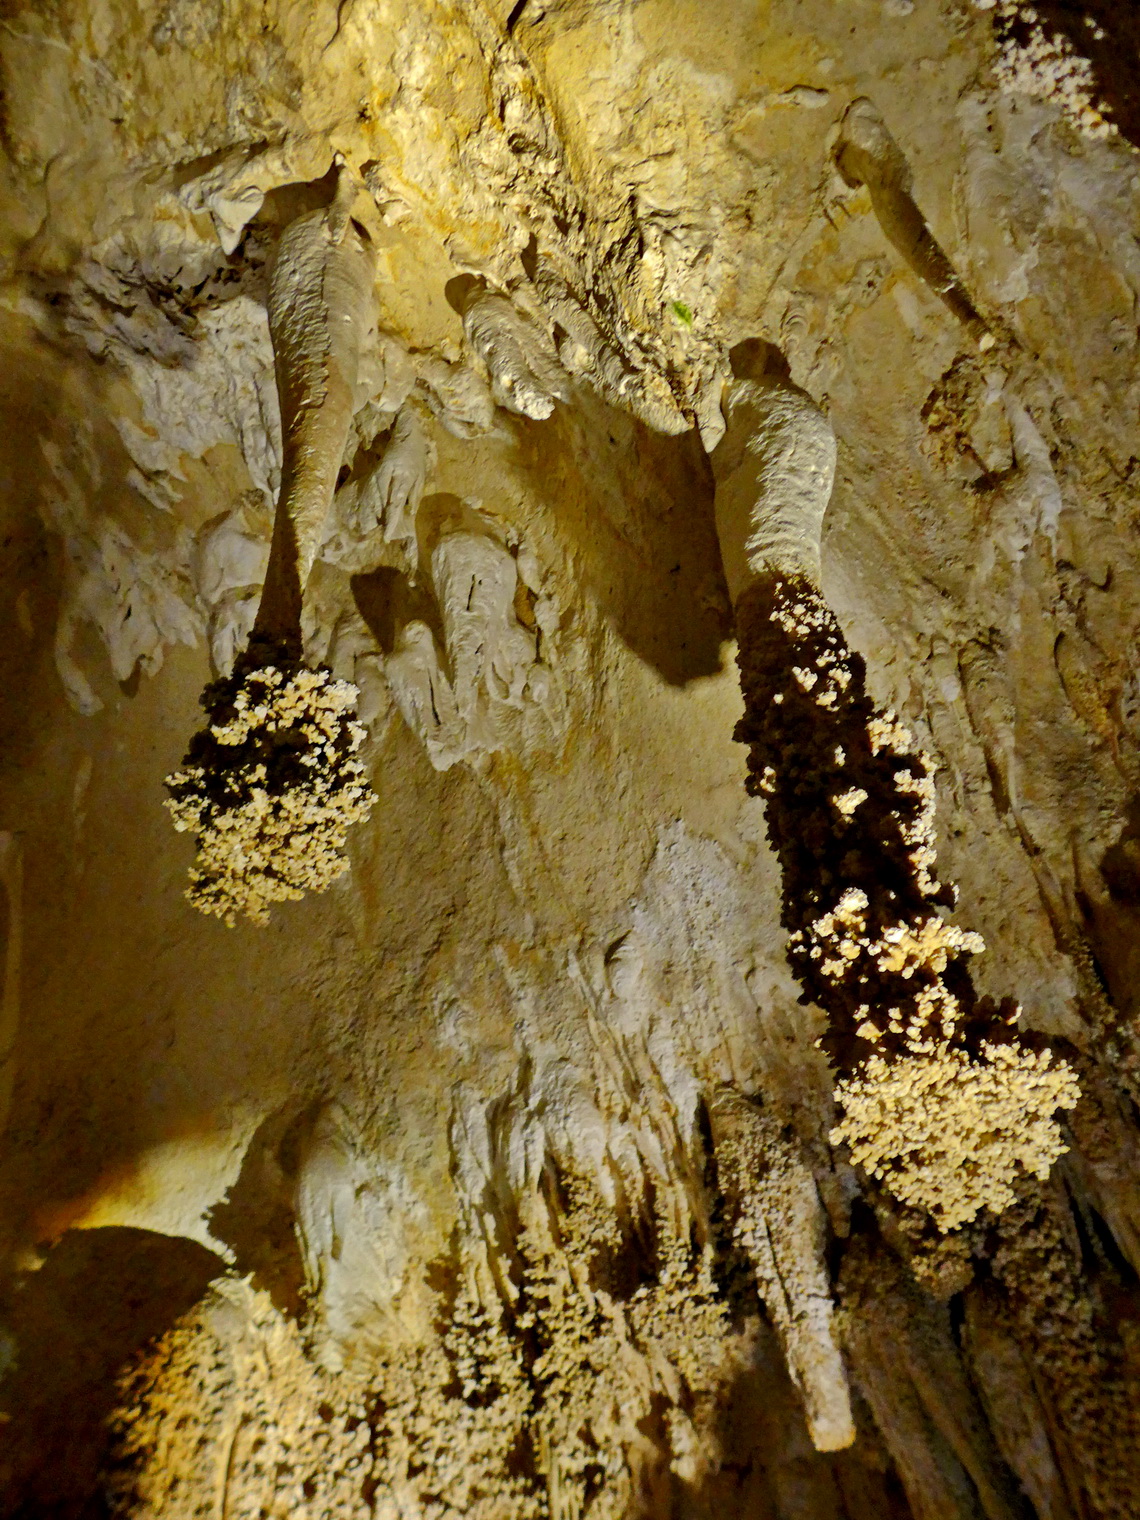 Lions Tails in the main cave